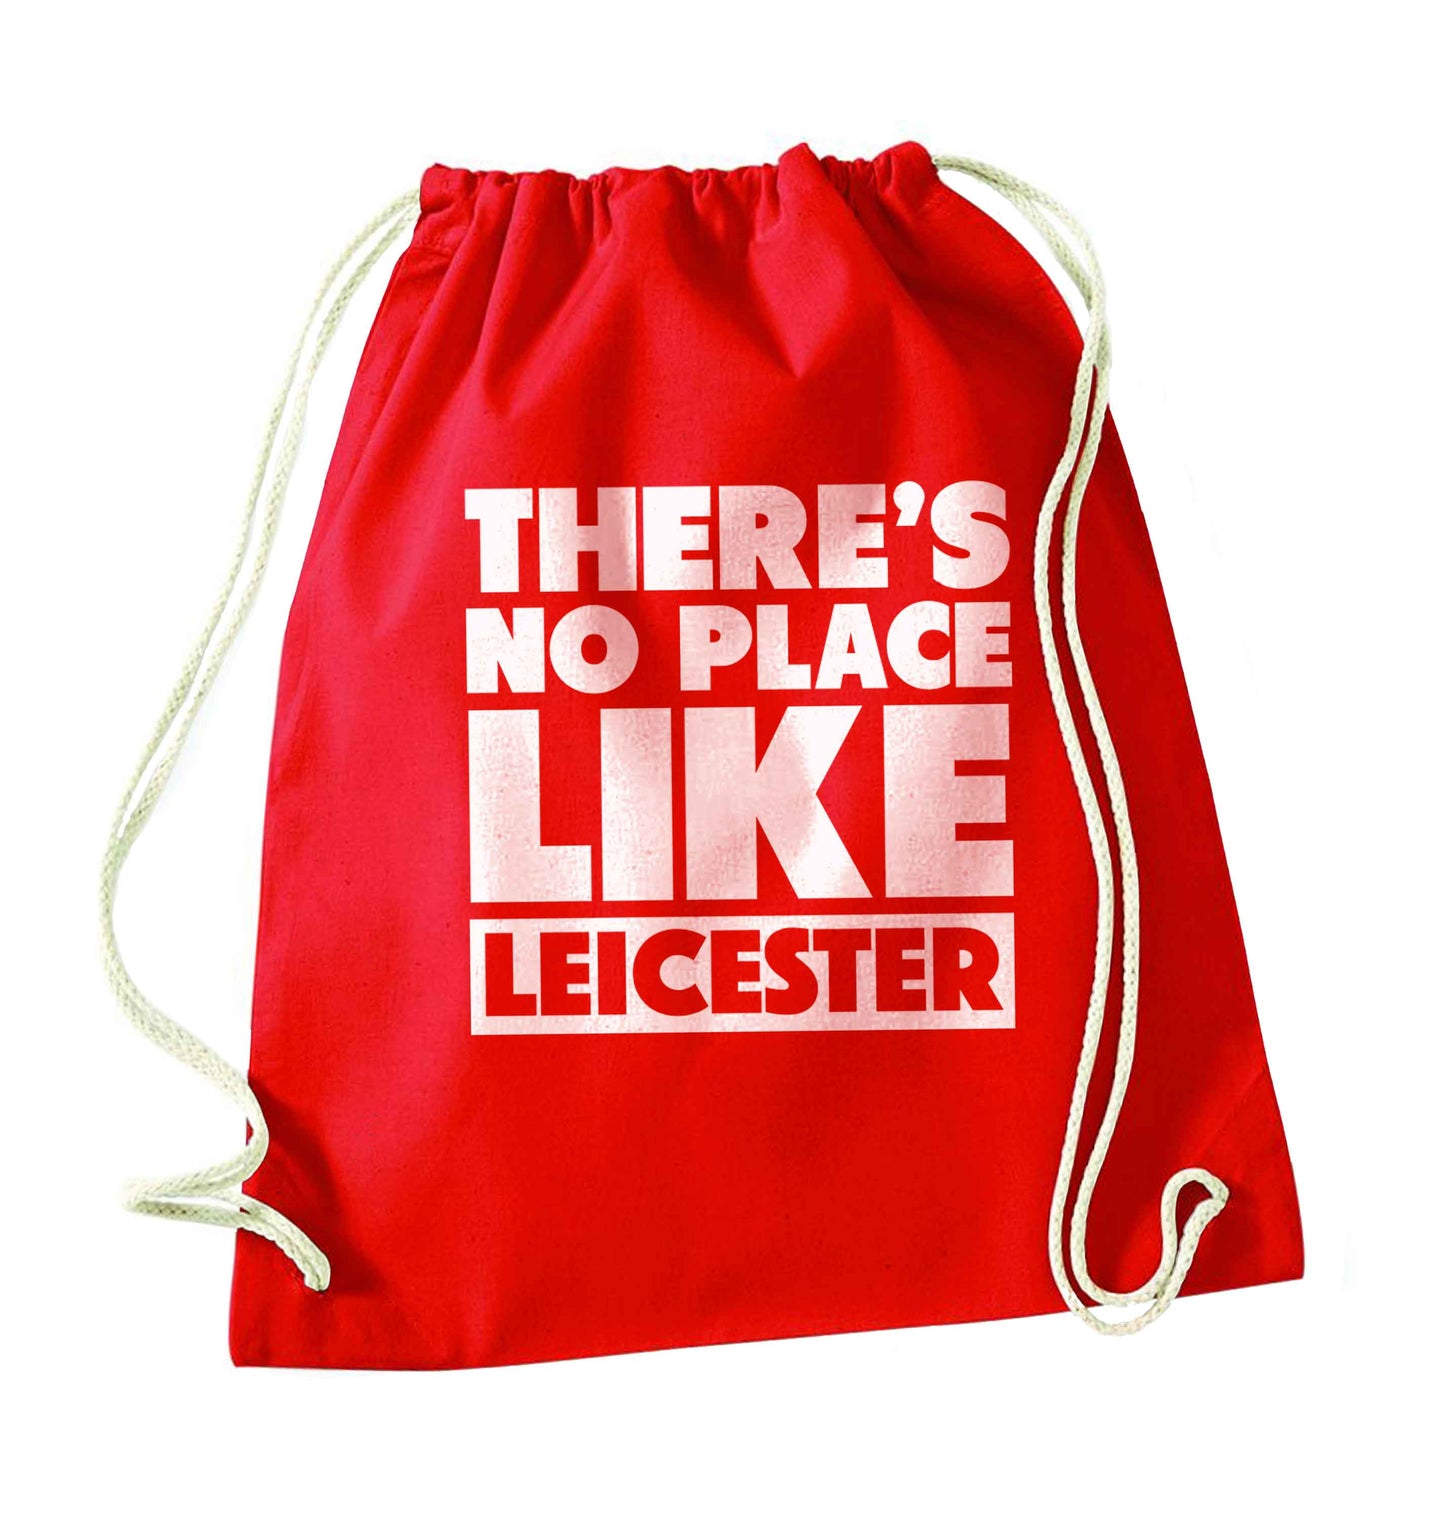 There's no place like Leicester red drawstring bag 